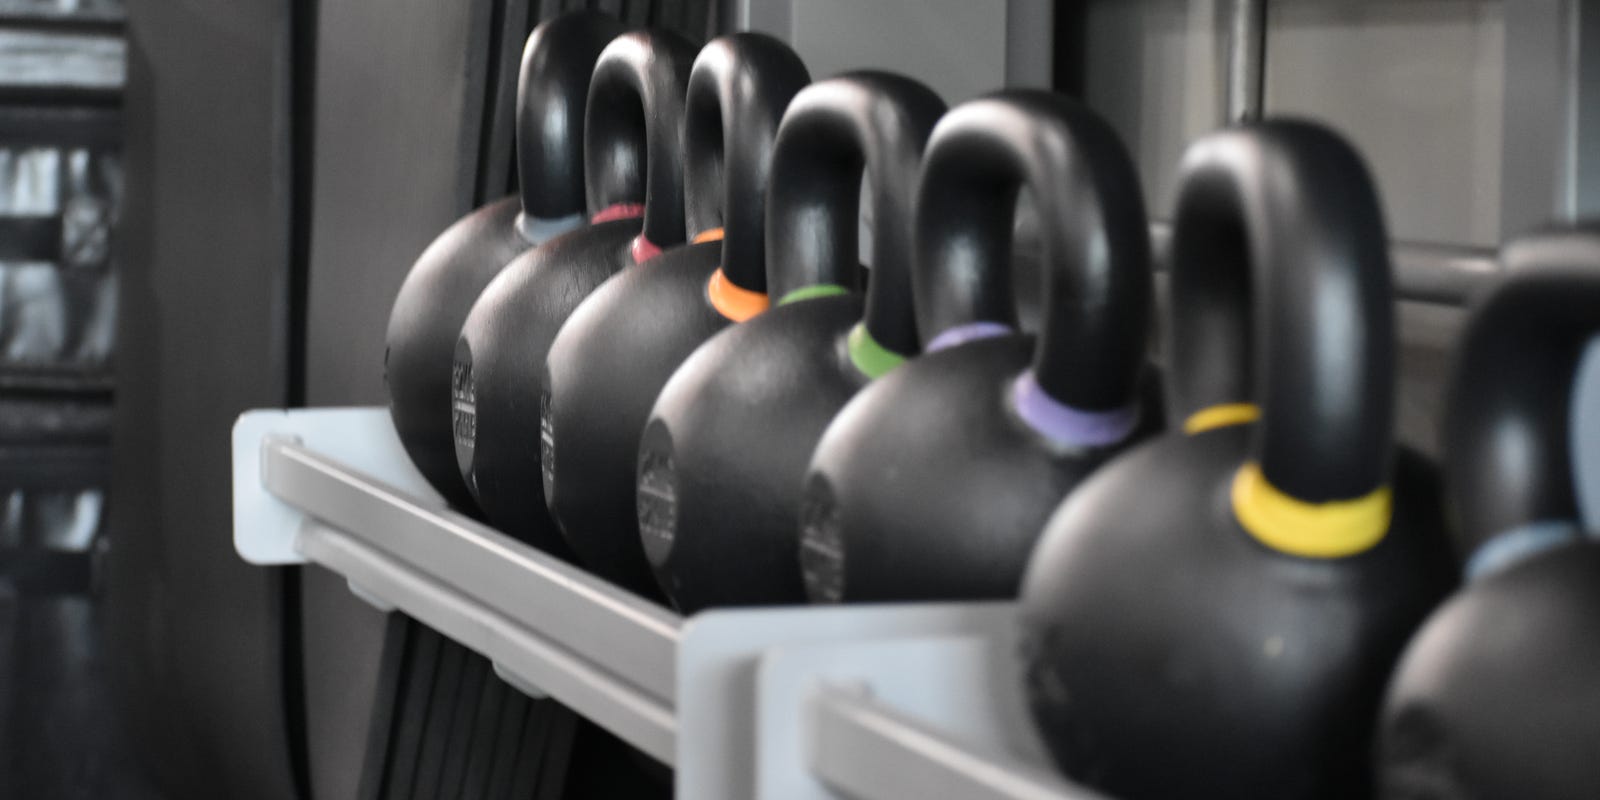 Looking to get your summer body ready? Check out these tips and deals at area gyms